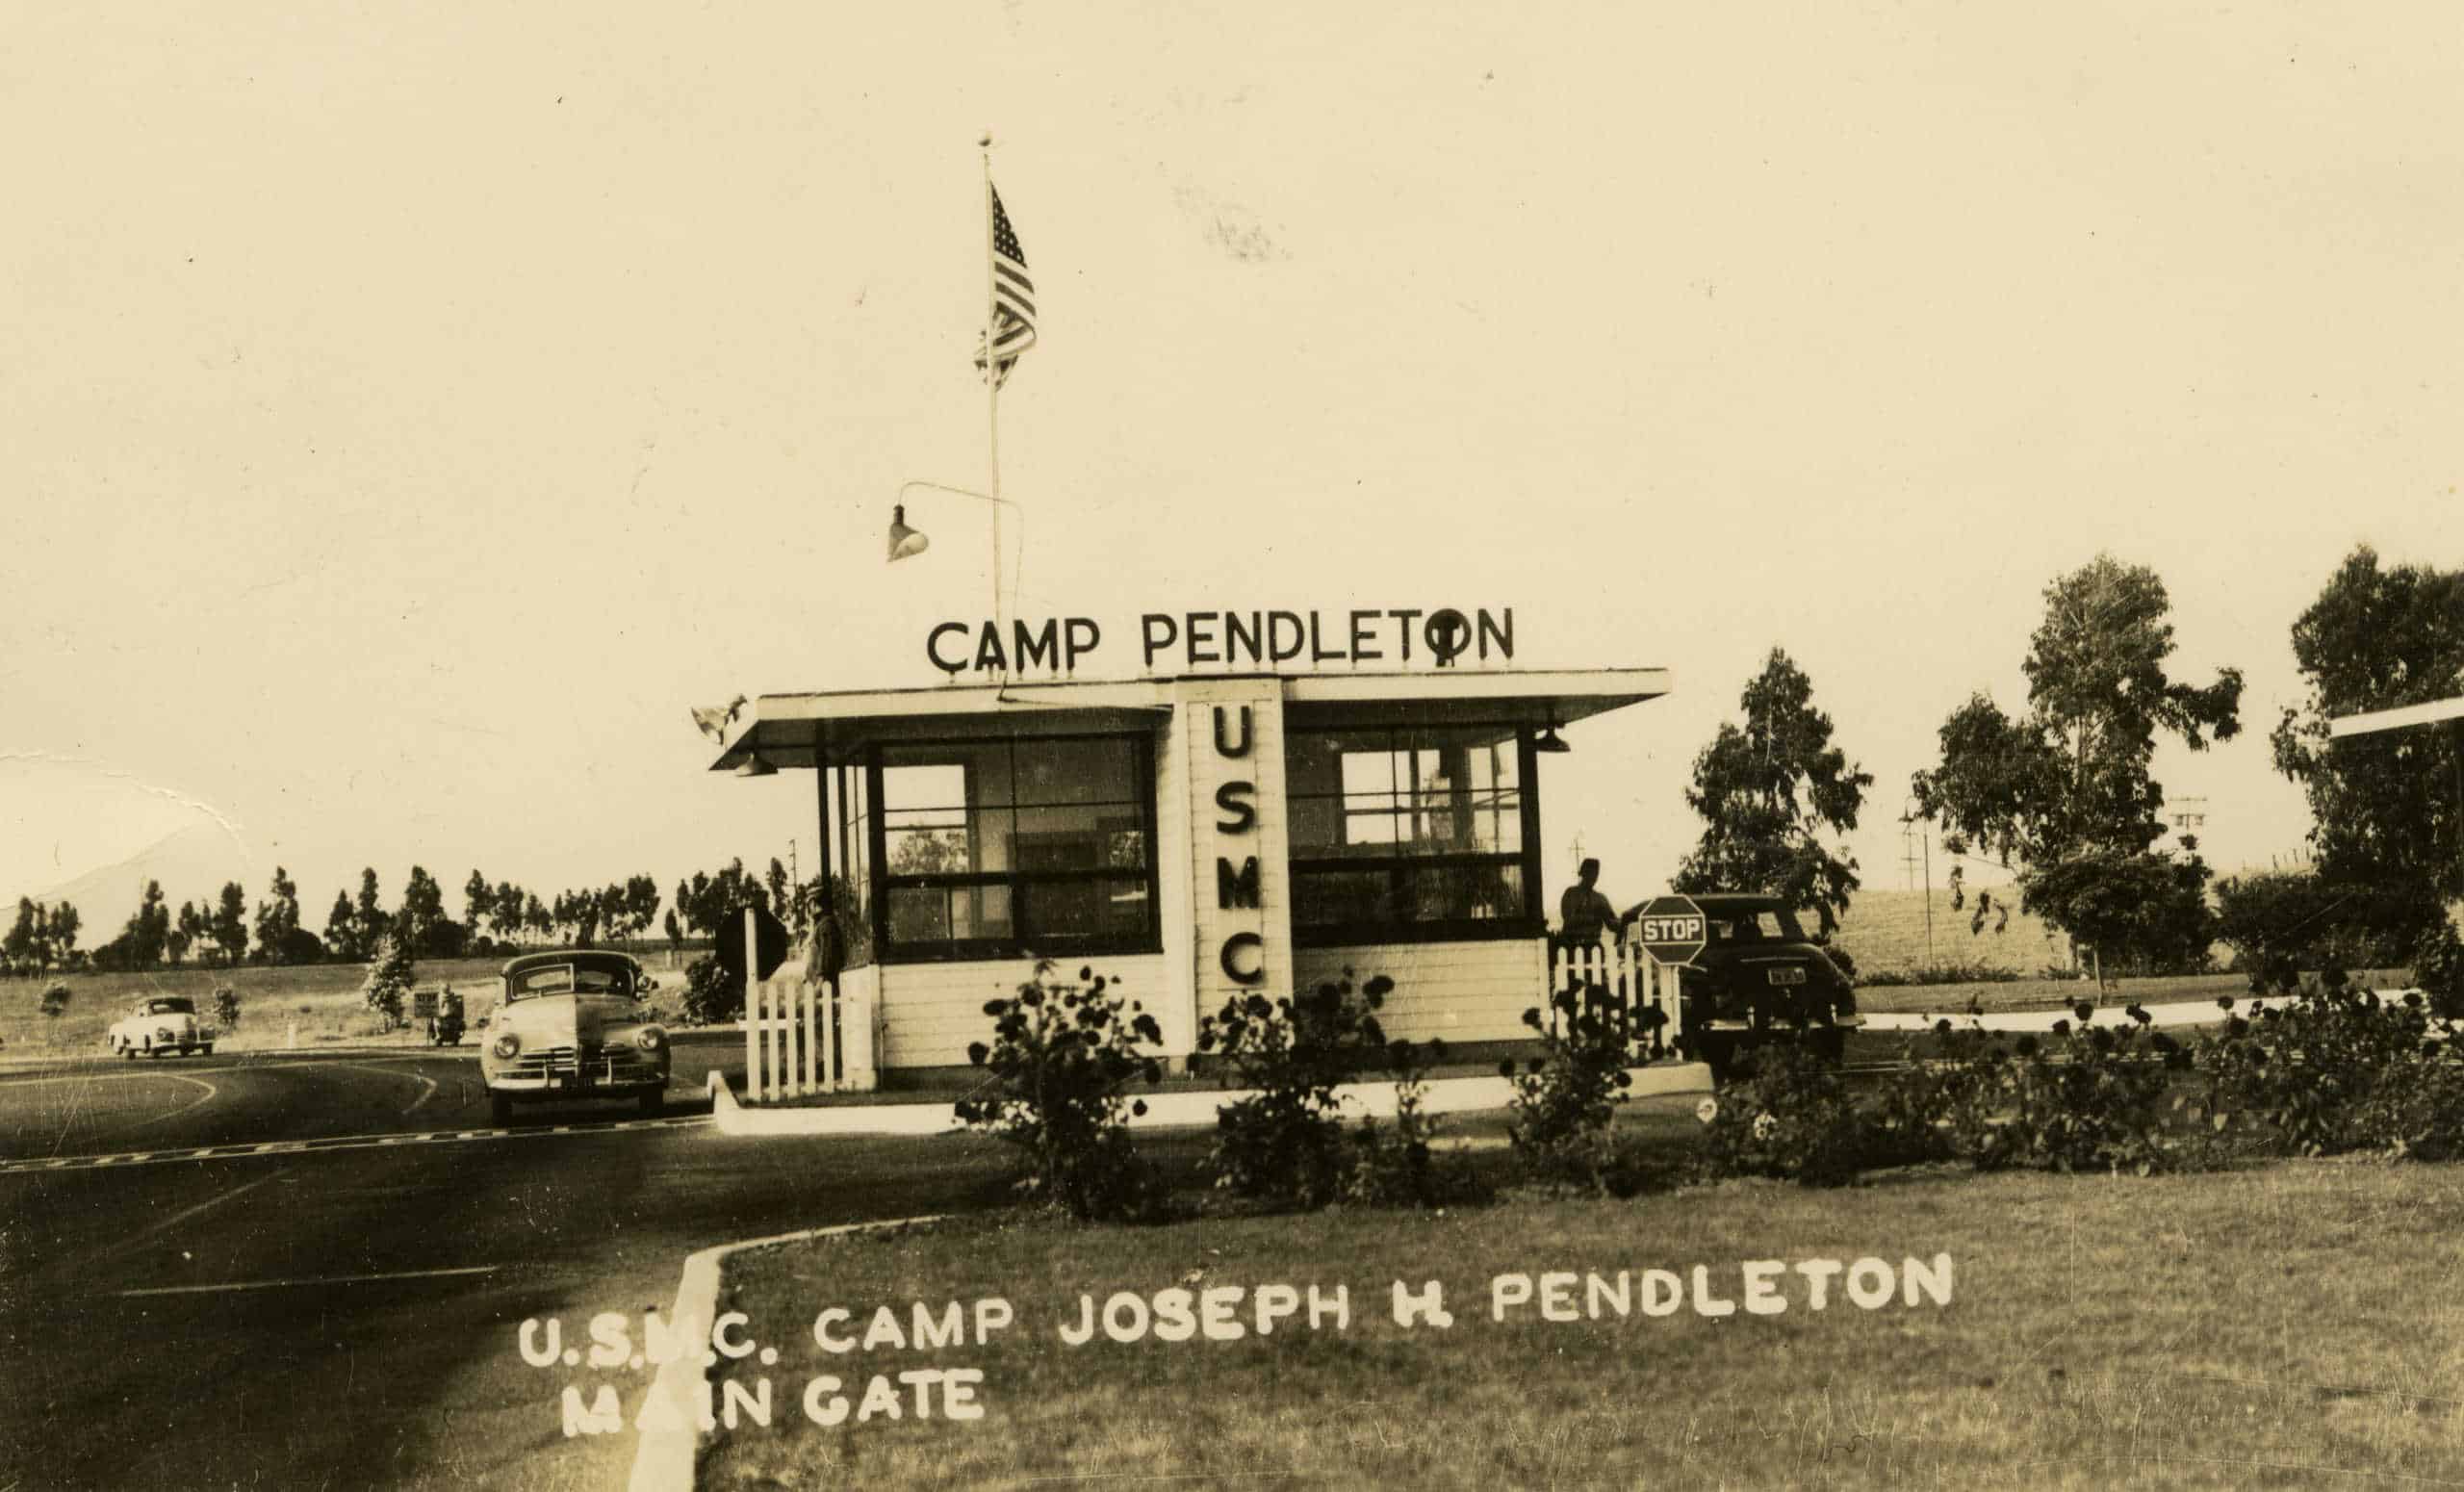 5 Things You May Not Know About Camp Pendleton